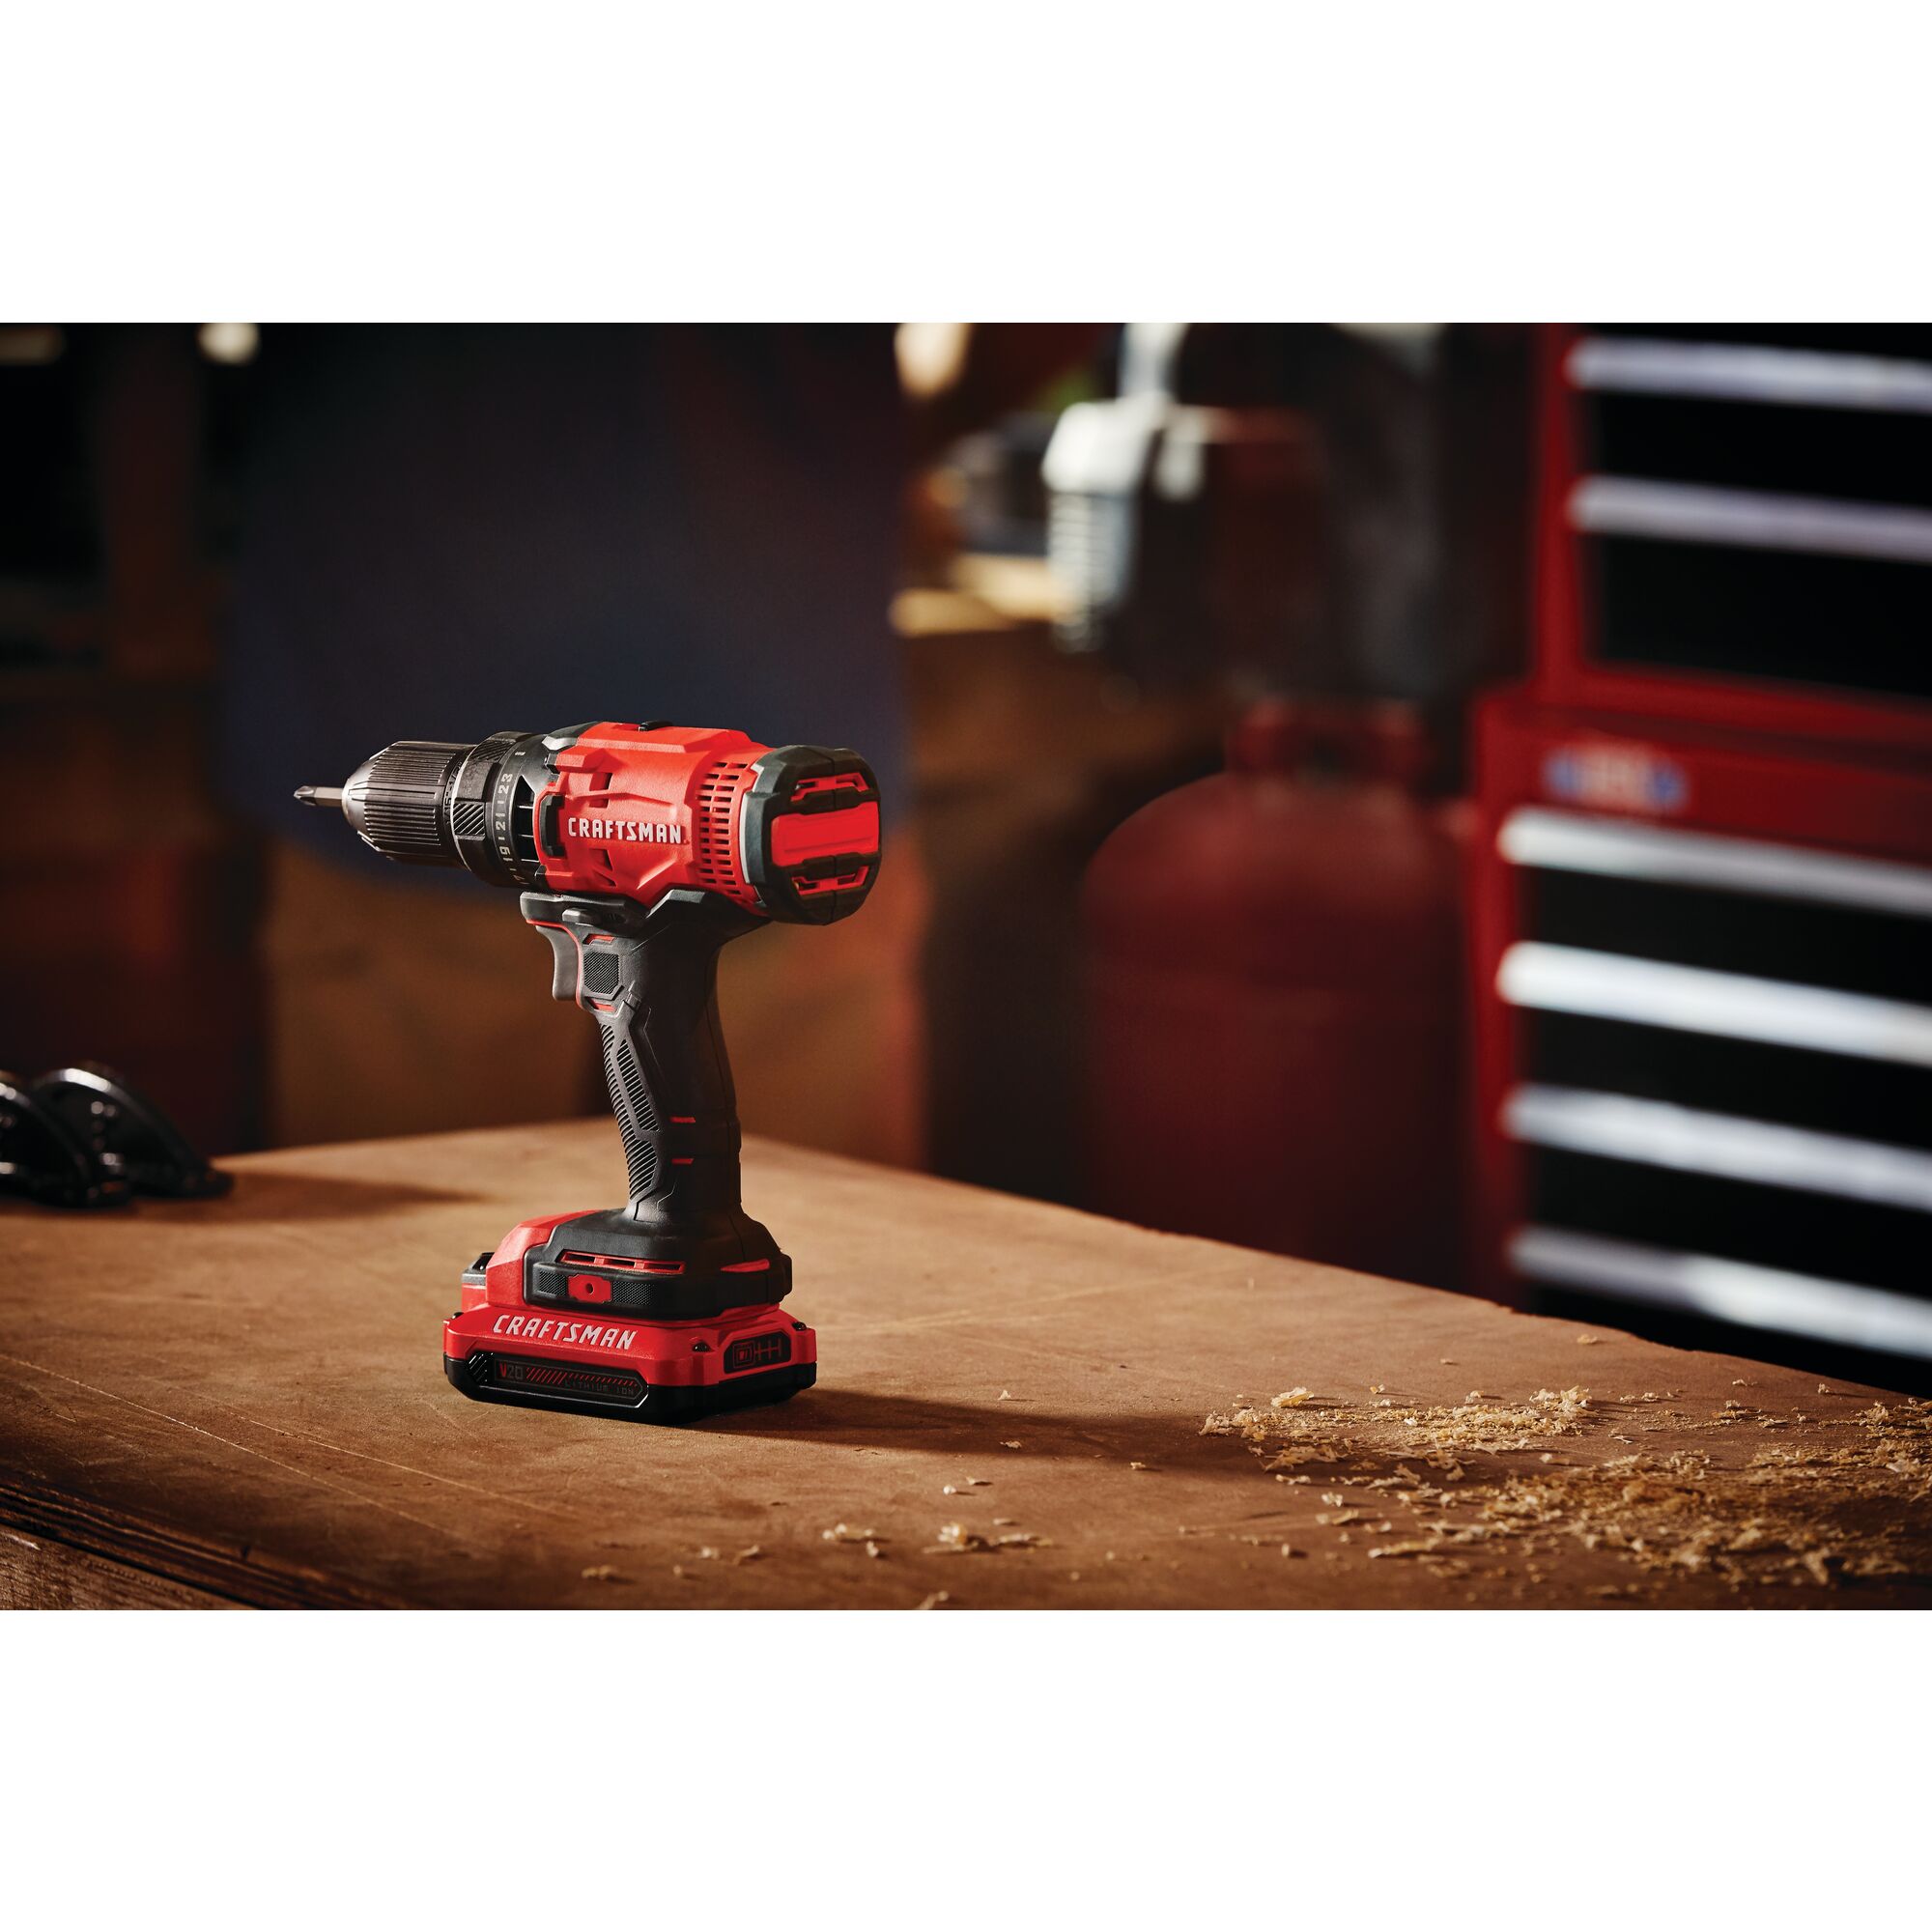 Cordless half inch drill and driver kit 1 battery placed on wooden table in workshop.